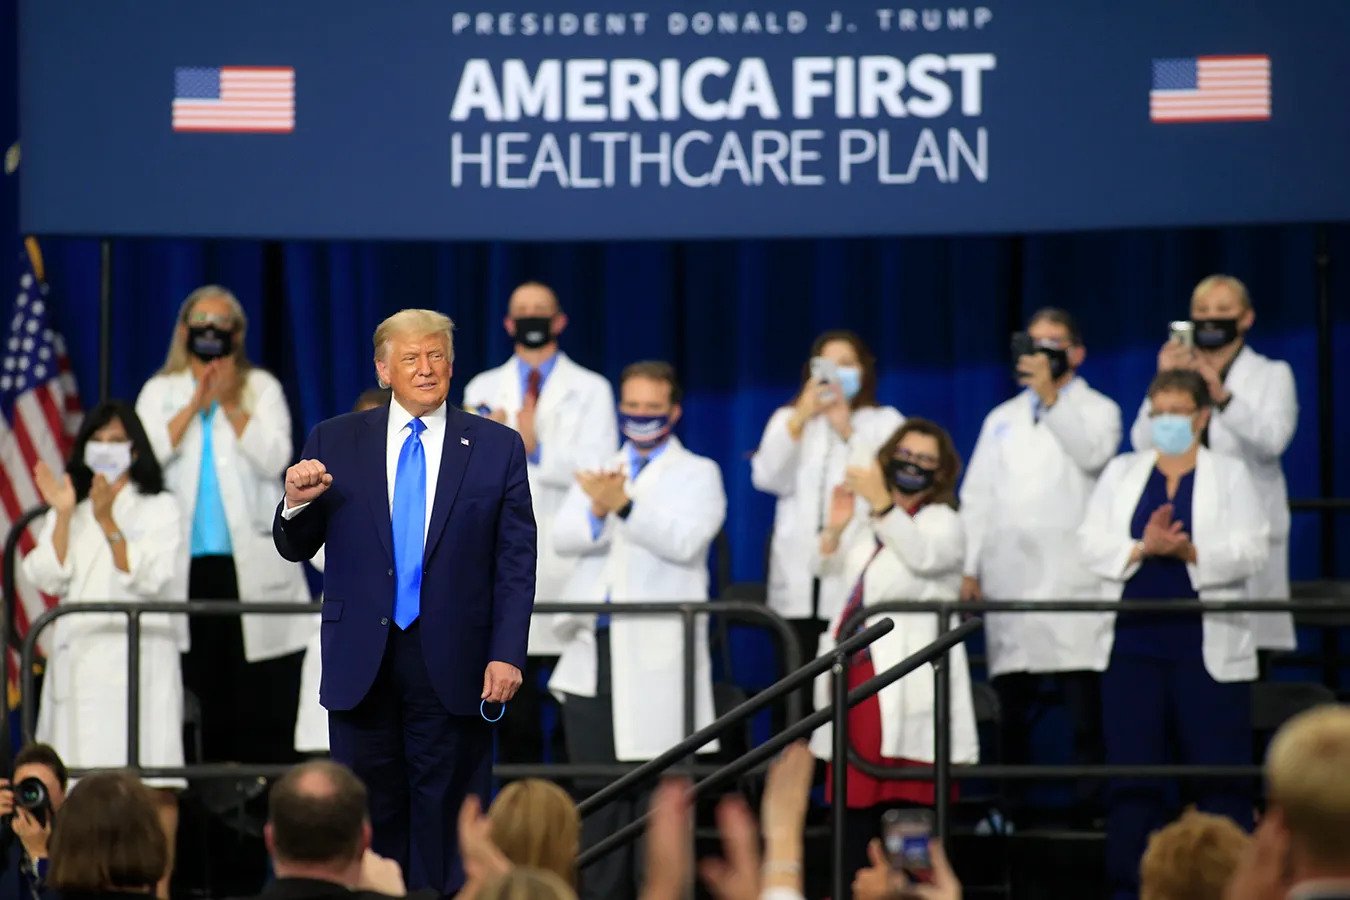 Donald Trump in America first healthcare plan conference